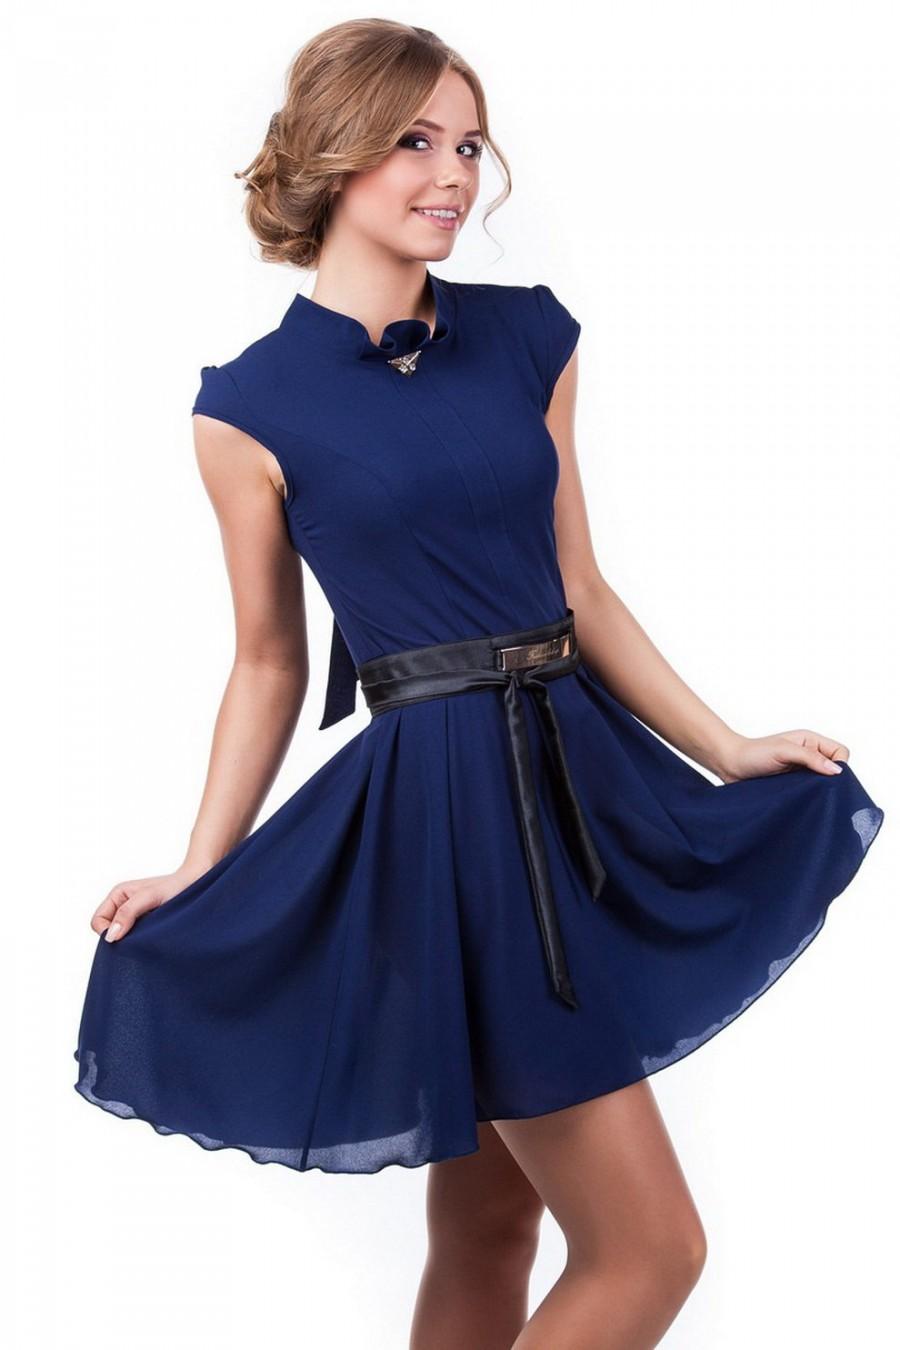 Wedding - Cocktail dress Navy blue Formal chiffon dress. Dress knee length bridesmaid. Prom flared dress with lace and bow on the back. Evening dress.